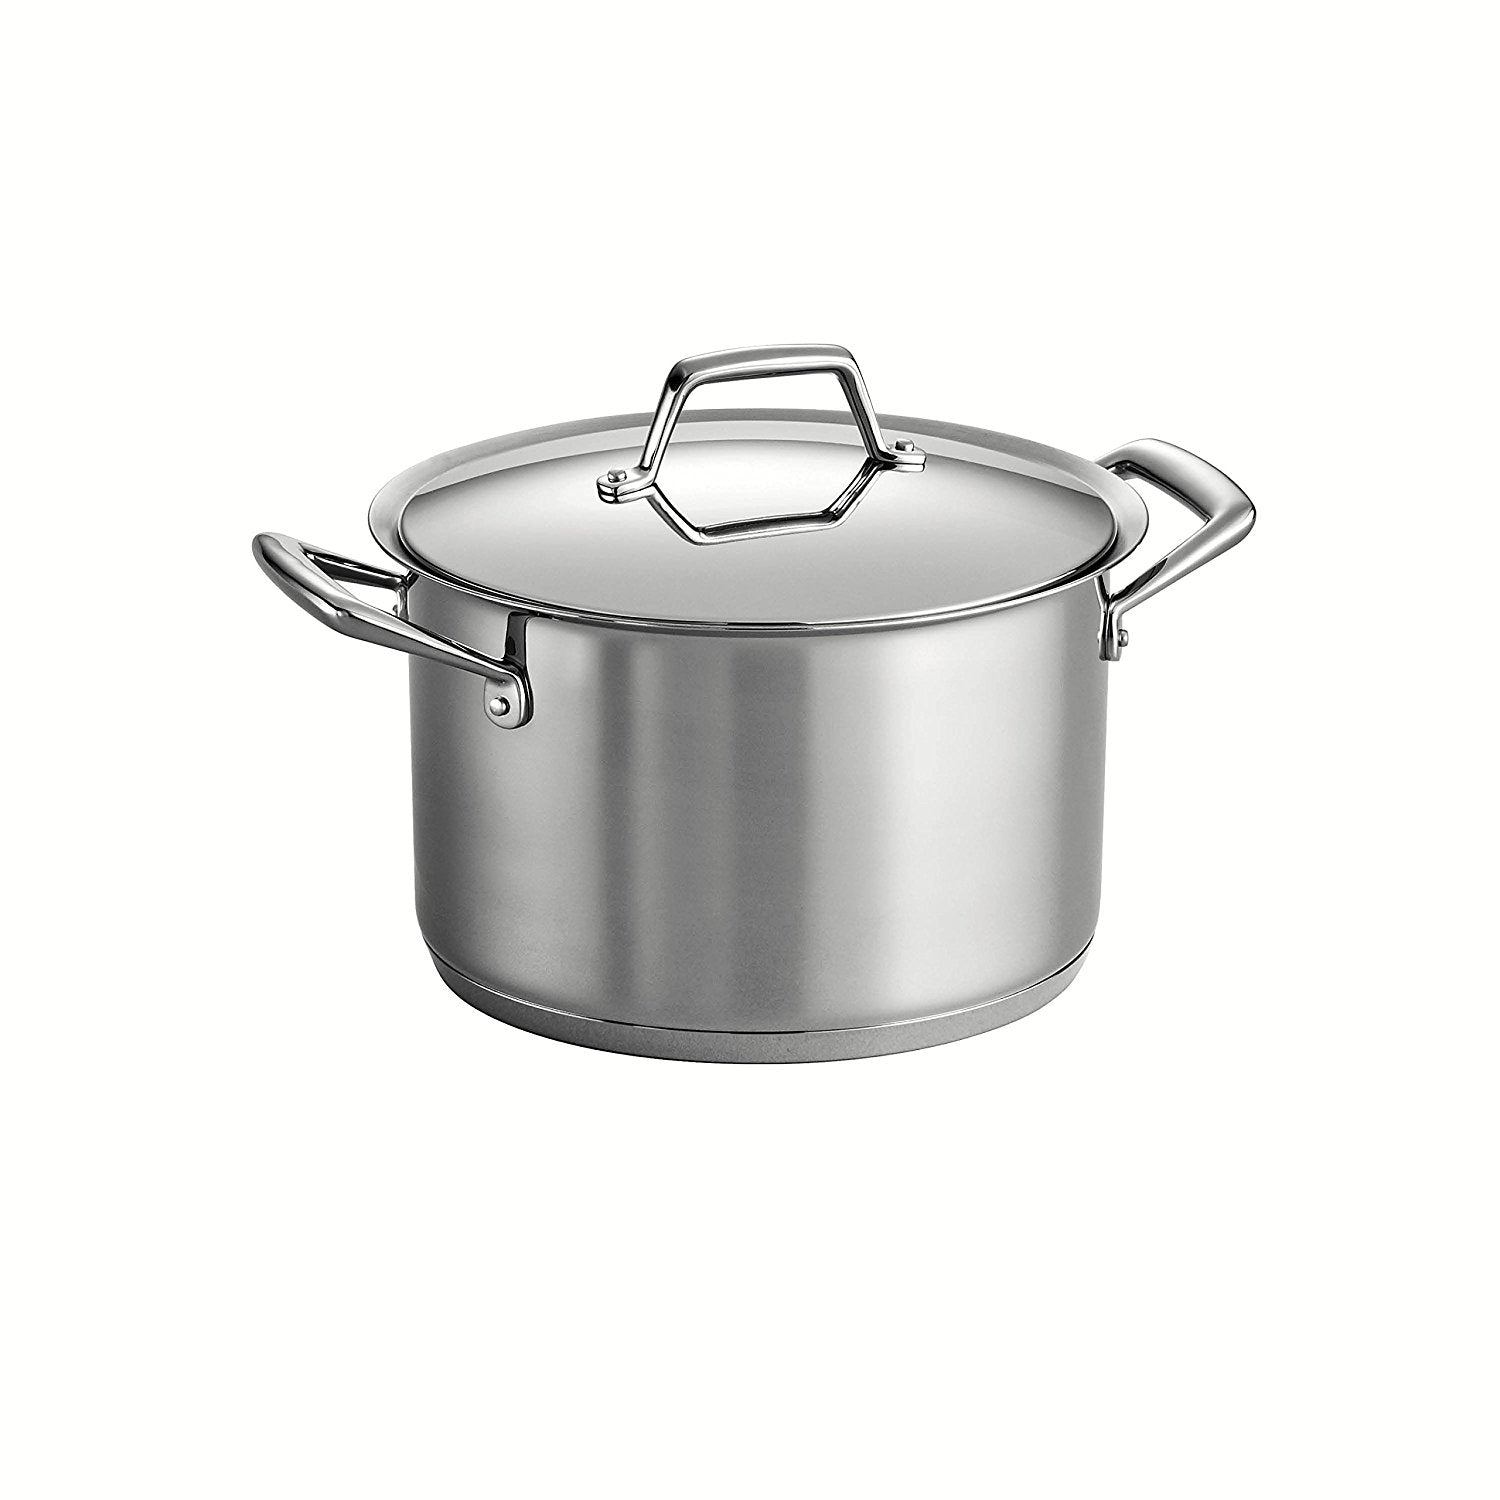 Tramontina 80101-011DS 8QT Prima 18/10 Tri-Ply Base Covered Stock Pot, Stainless Steel - Induction Ready, Dishwasher Safe, Oven Safe COOKPOT